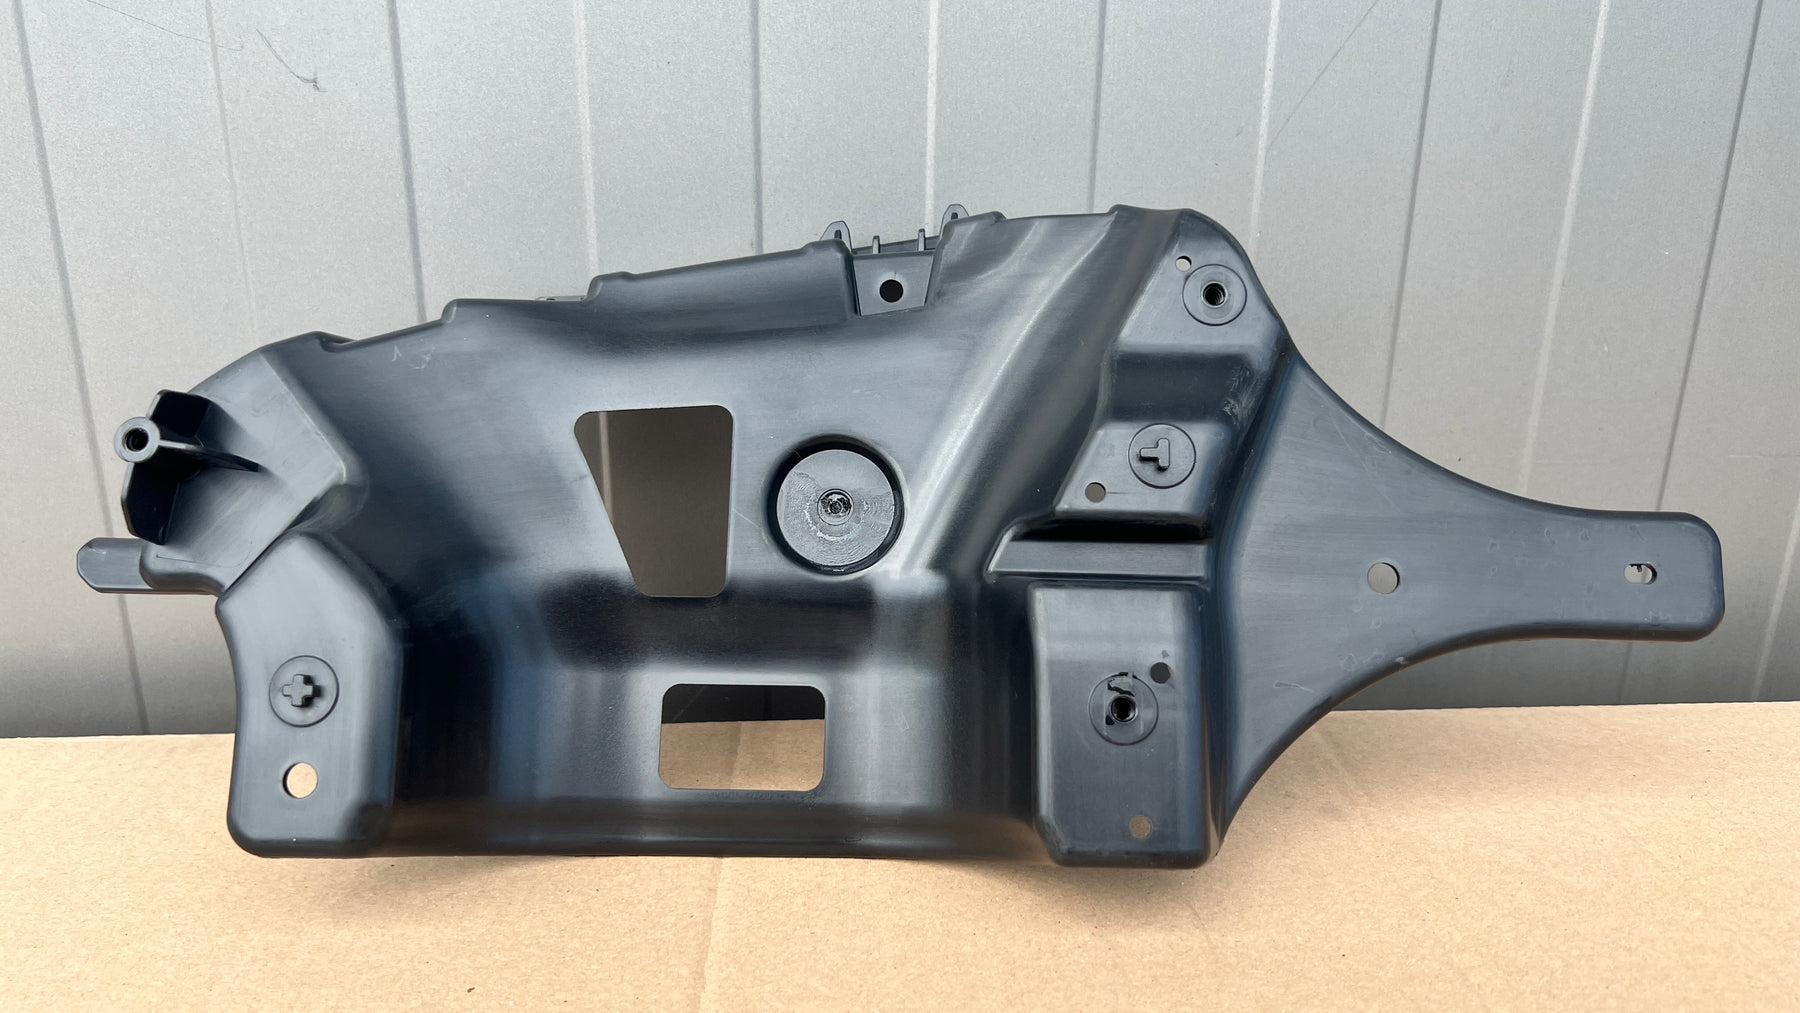 Mercedes Benz S Class W223 Exhaust Tail Pipe Tip Bracket LH, OEM, Part number: 223-885-15-02